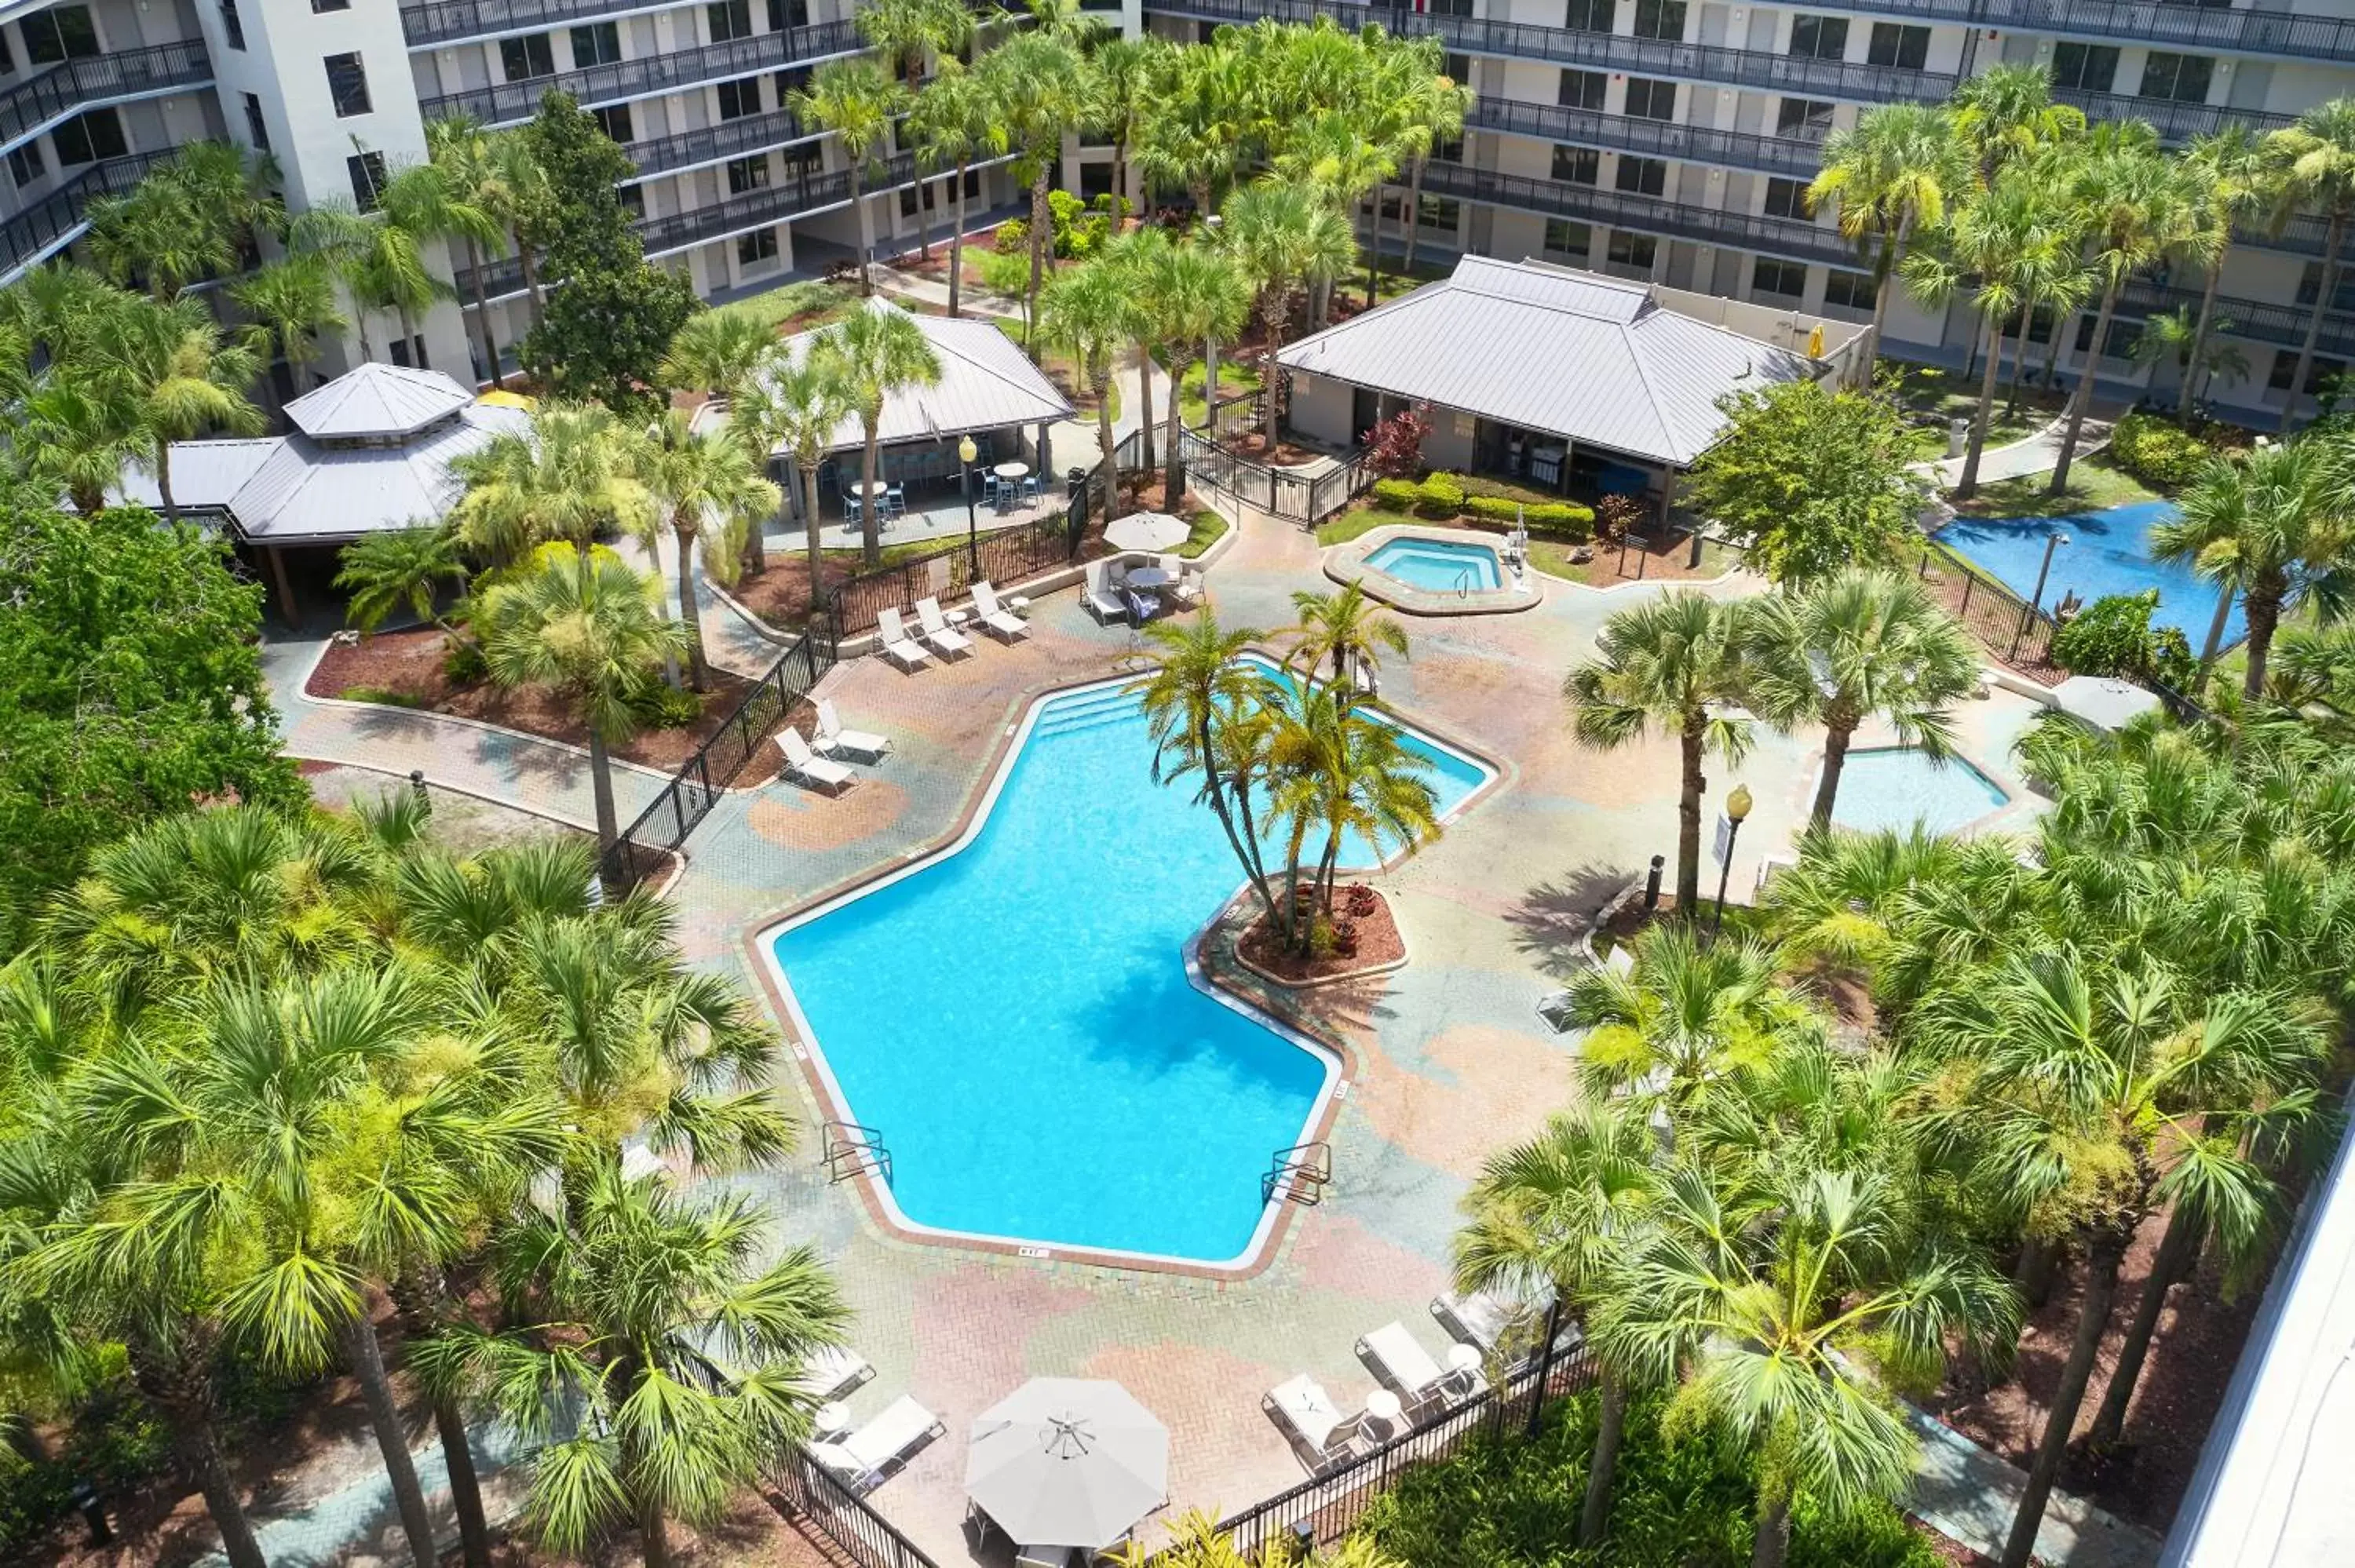 Property building, Pool View in Staybridge Suites Orlando Royale Parc Suites, an IHG Hotel